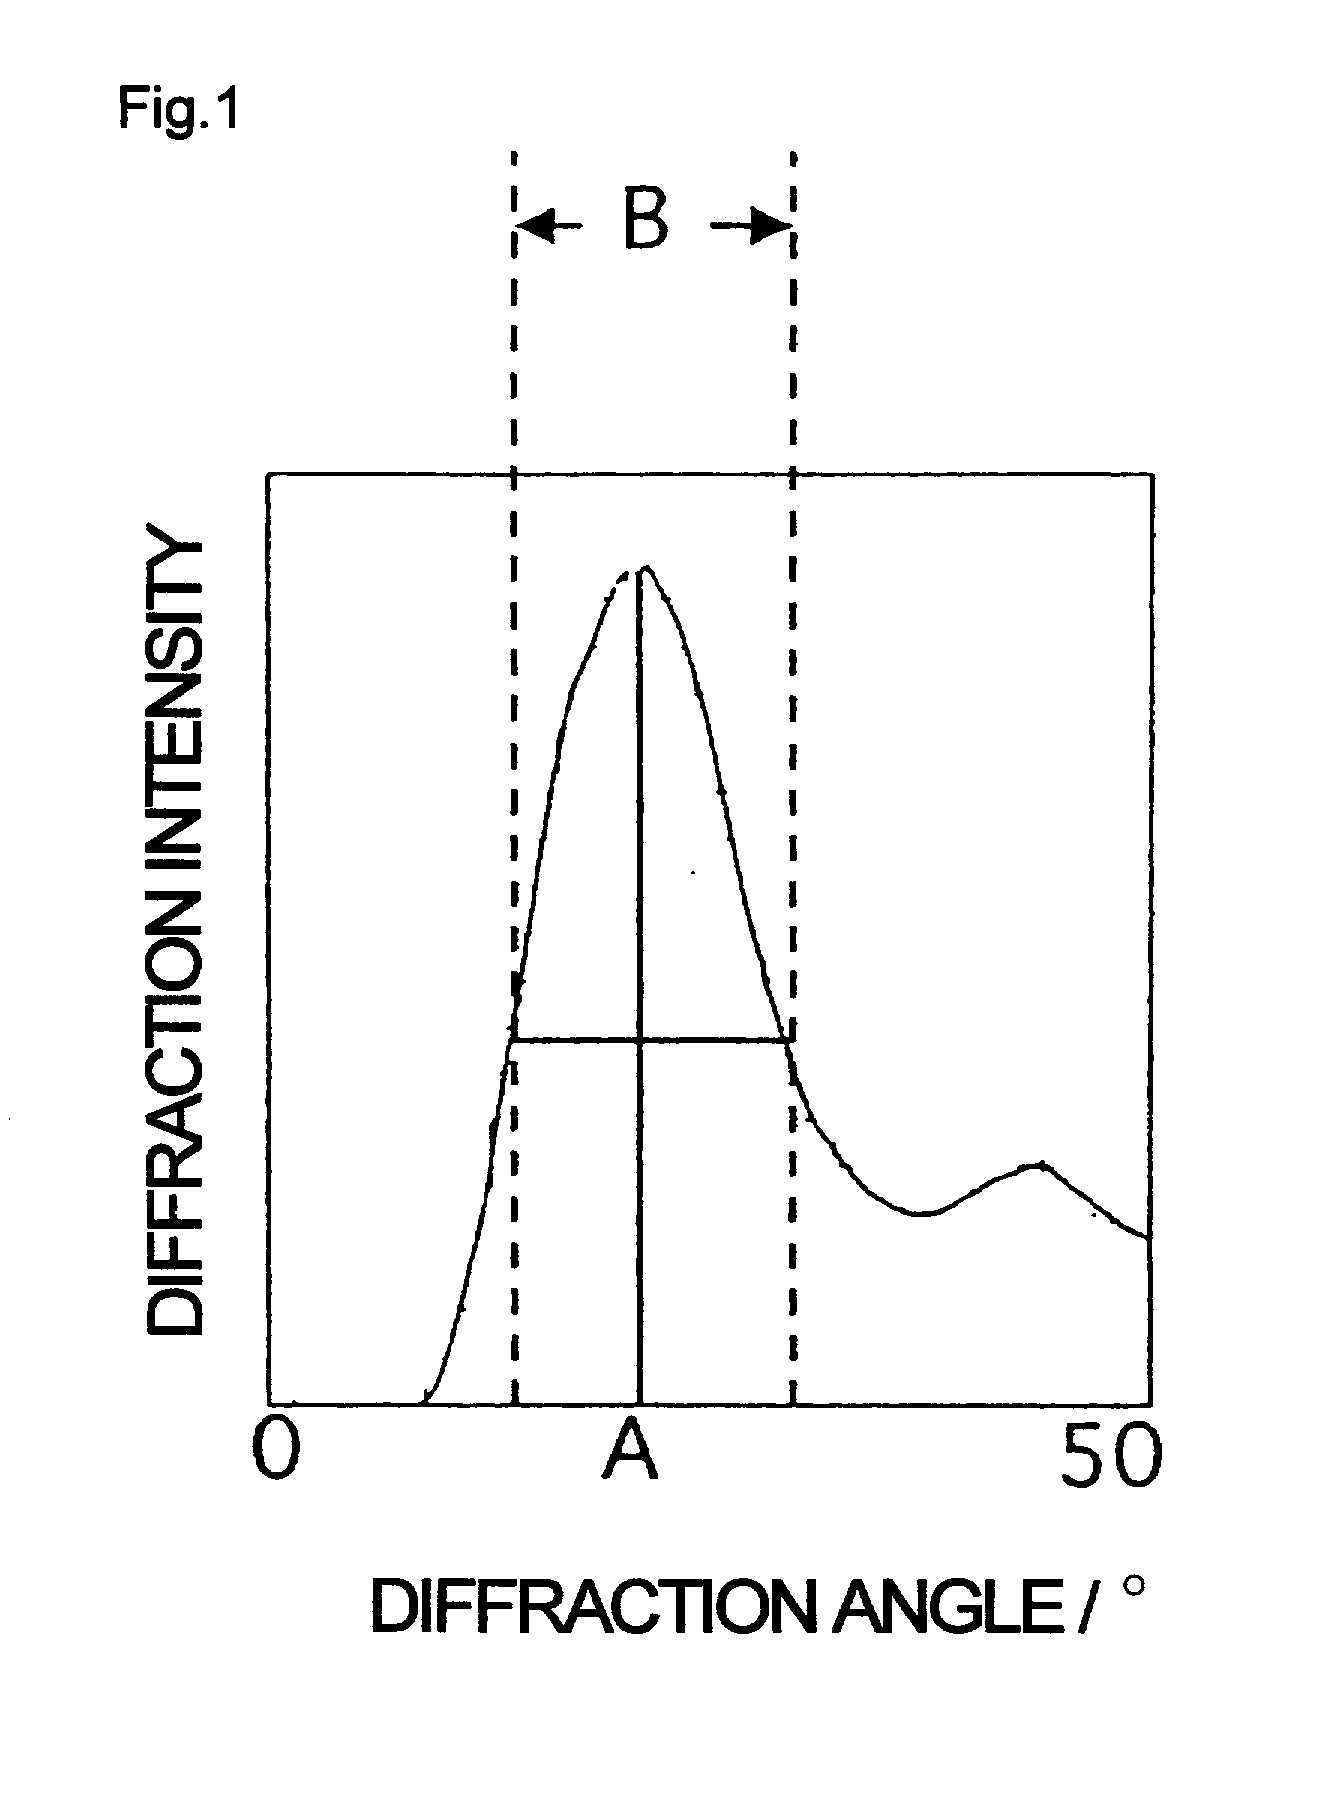 Multi-layered preform and multi-layered bottle manufactured by using the same